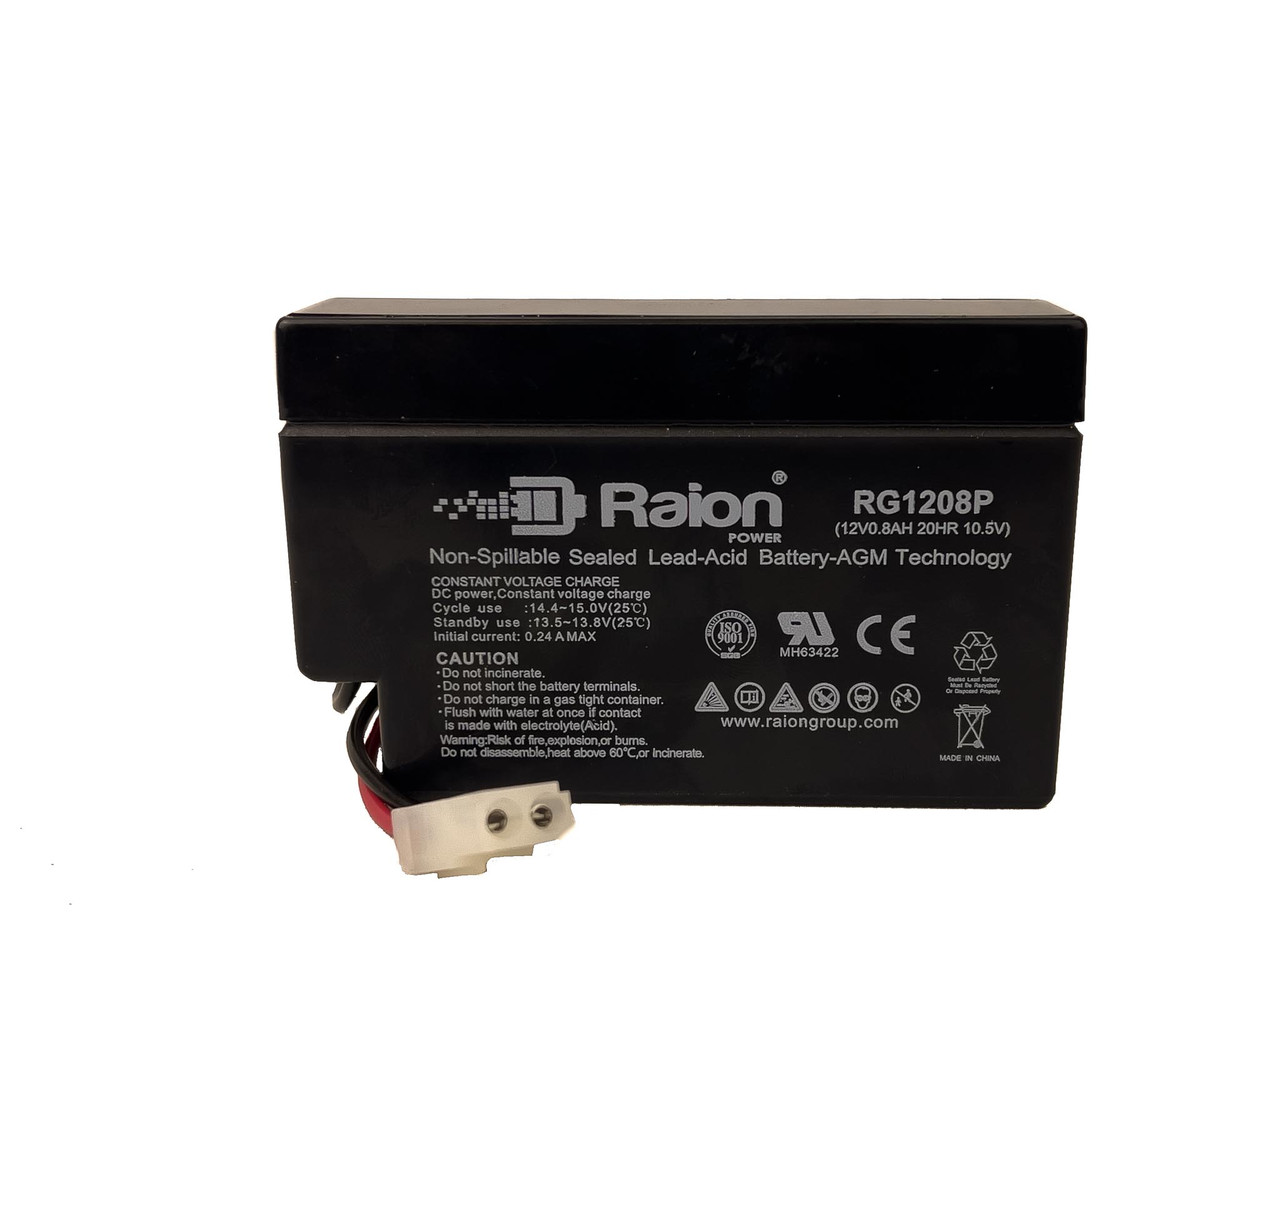 Raion Power 12V 0.8Ah SLA Battery With T1 Terminals For Ademco 7603